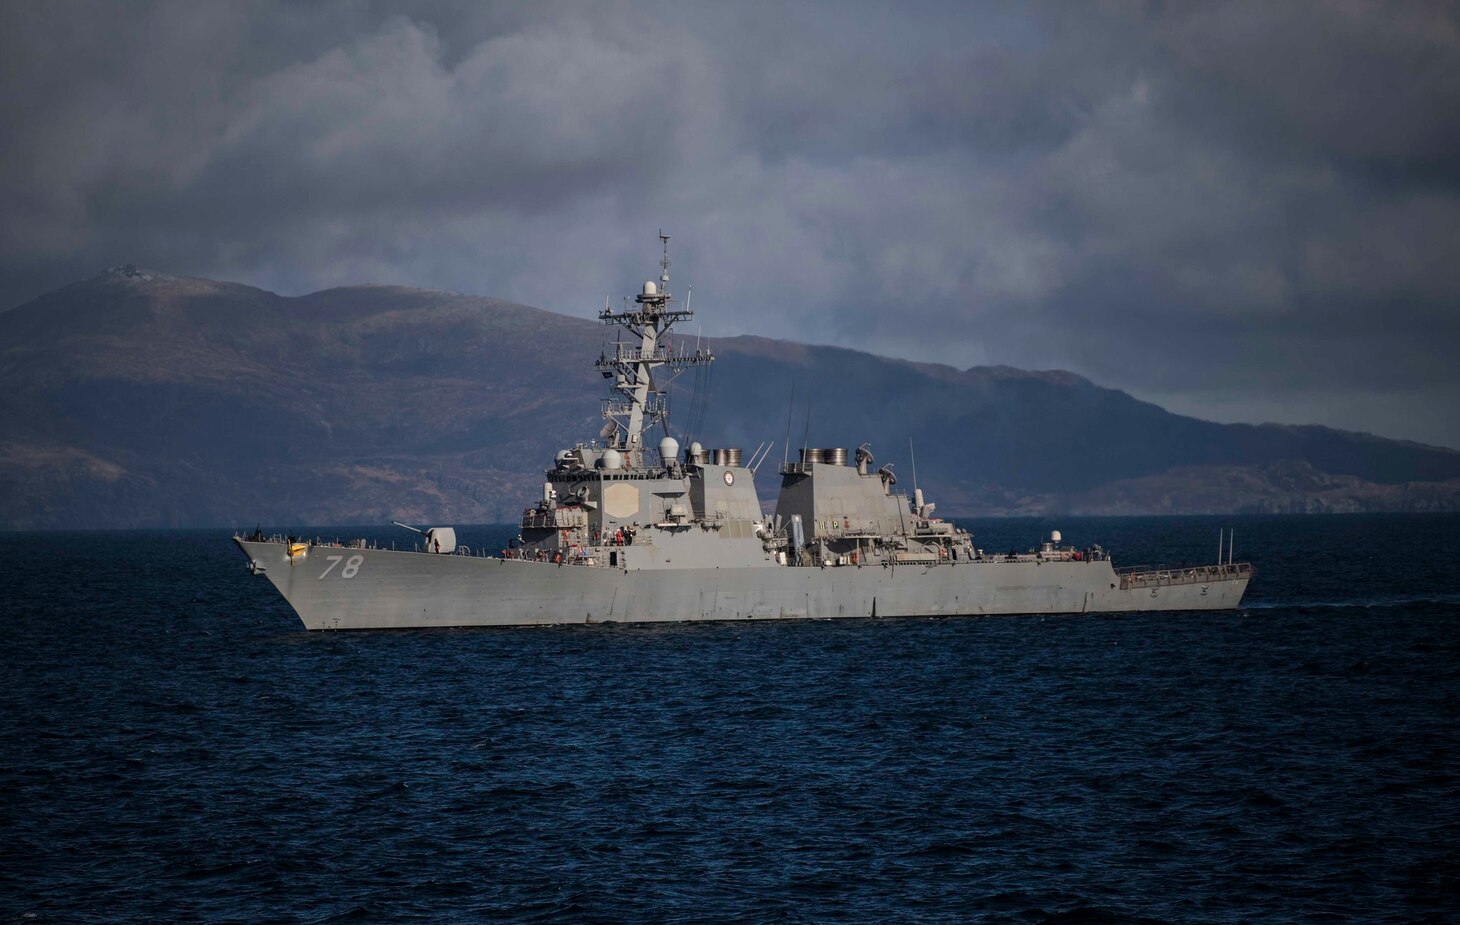 The Arleigh Burke-class guided-missile destroyer USS Porter (DDG 78) transits the North Channel during exercise Joint Warrior 19-1, April 2, 2019. Joint Warrior is a United Kingdom-led, multinational exercise in a robust maritime training environment in which allies and partners can improve interoperability and prepare forces for combined operations.